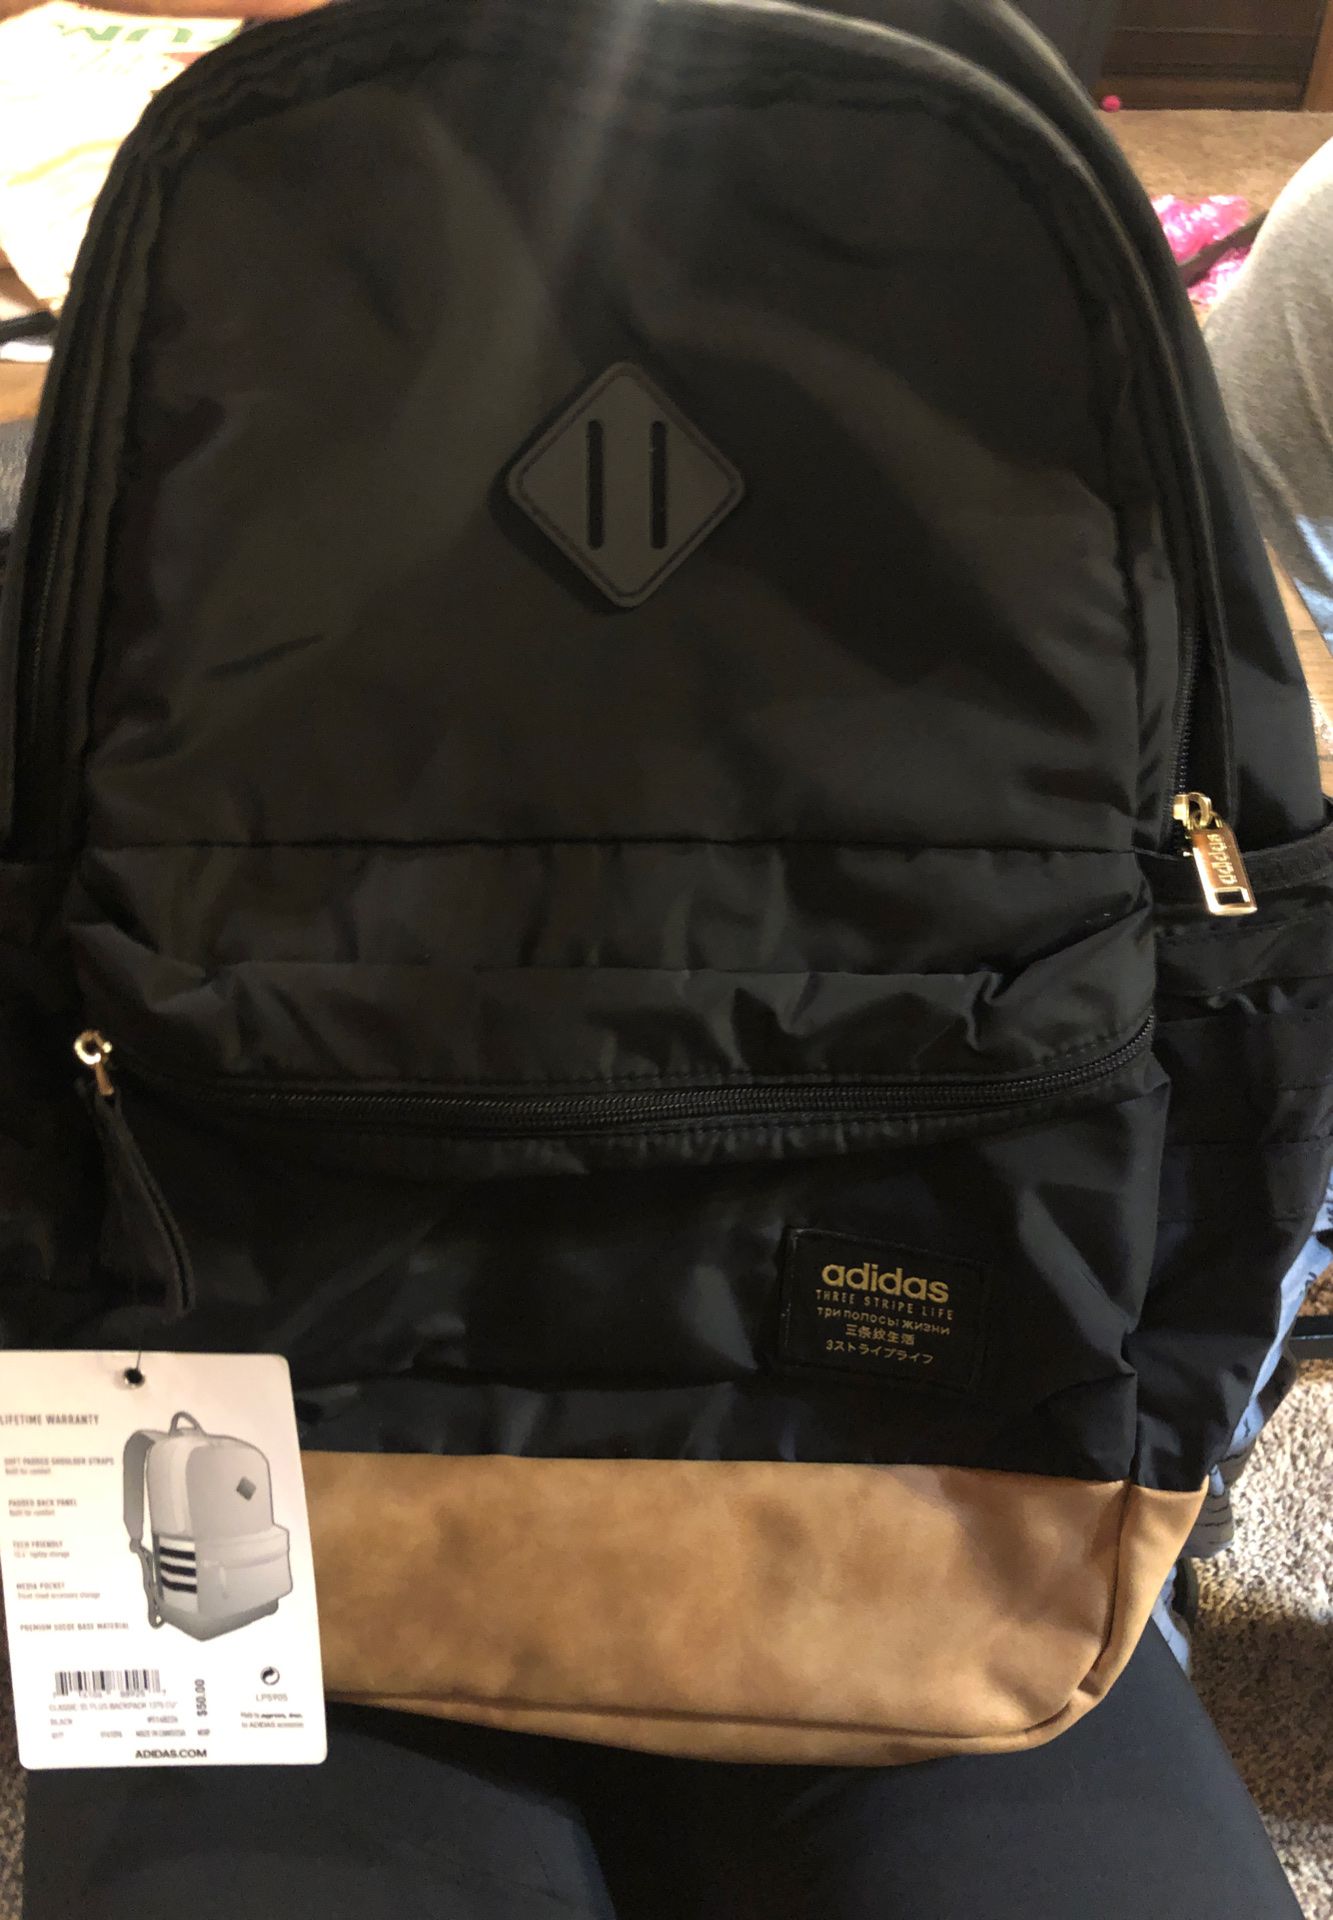 Brand new Adidas backpack $35